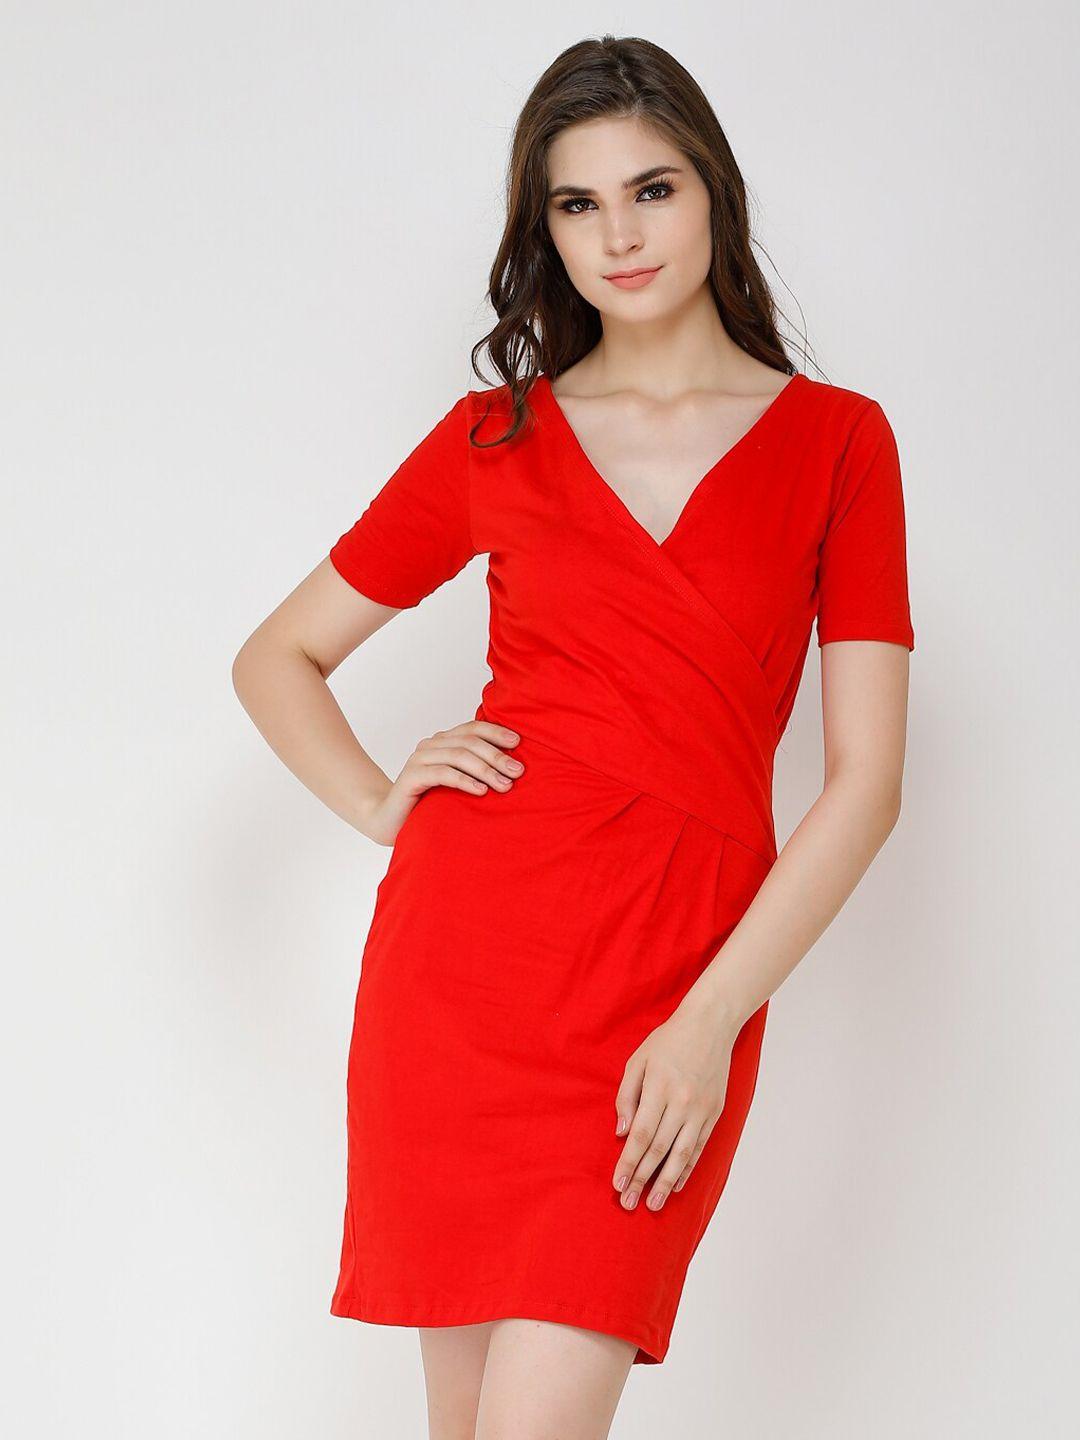 scorpius red solid bodycon dress